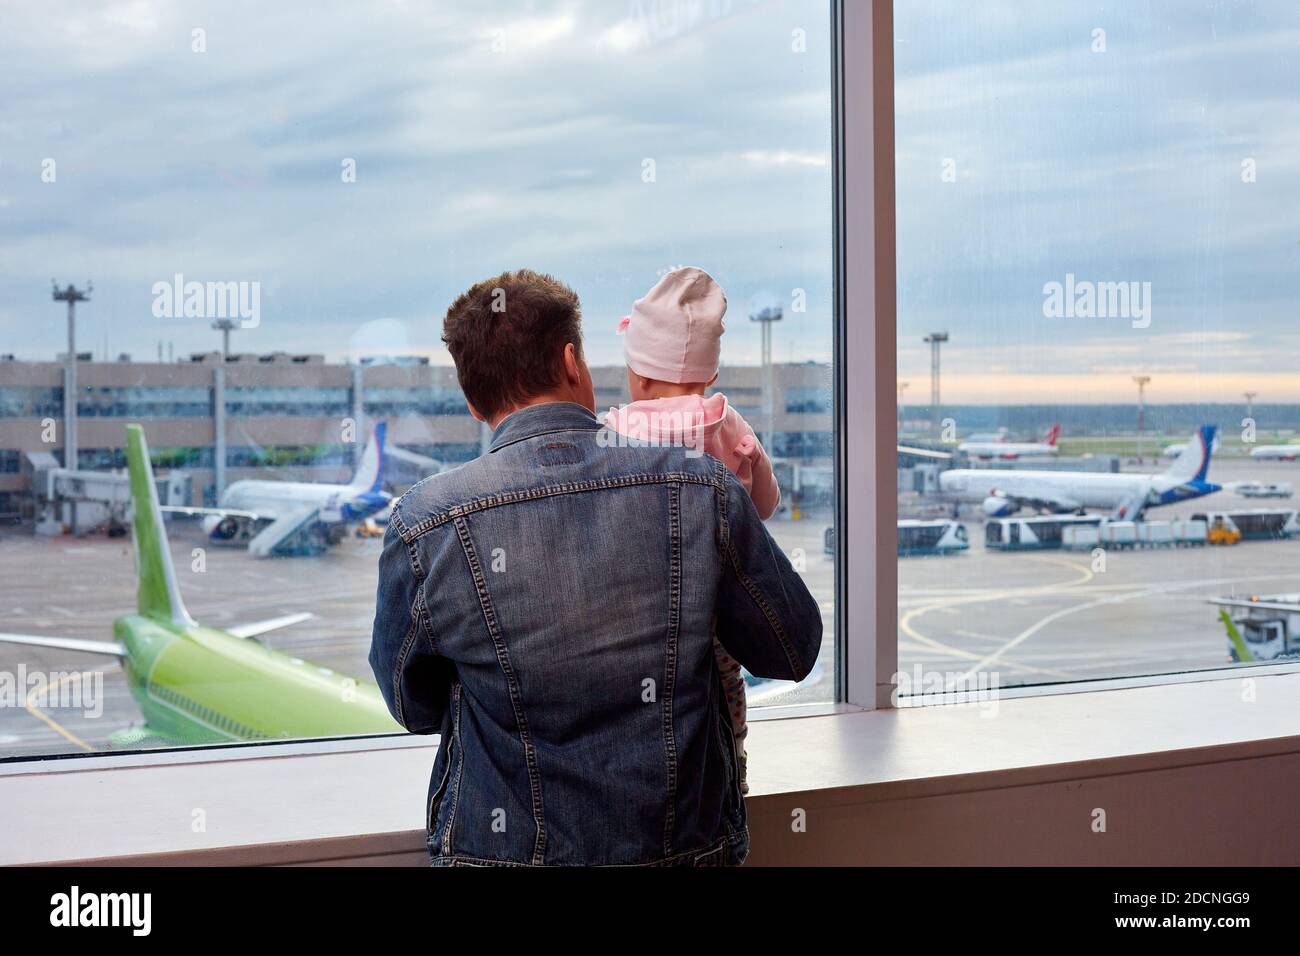 People at the airport. The man and daughter look out the window at the planes Stock Photo